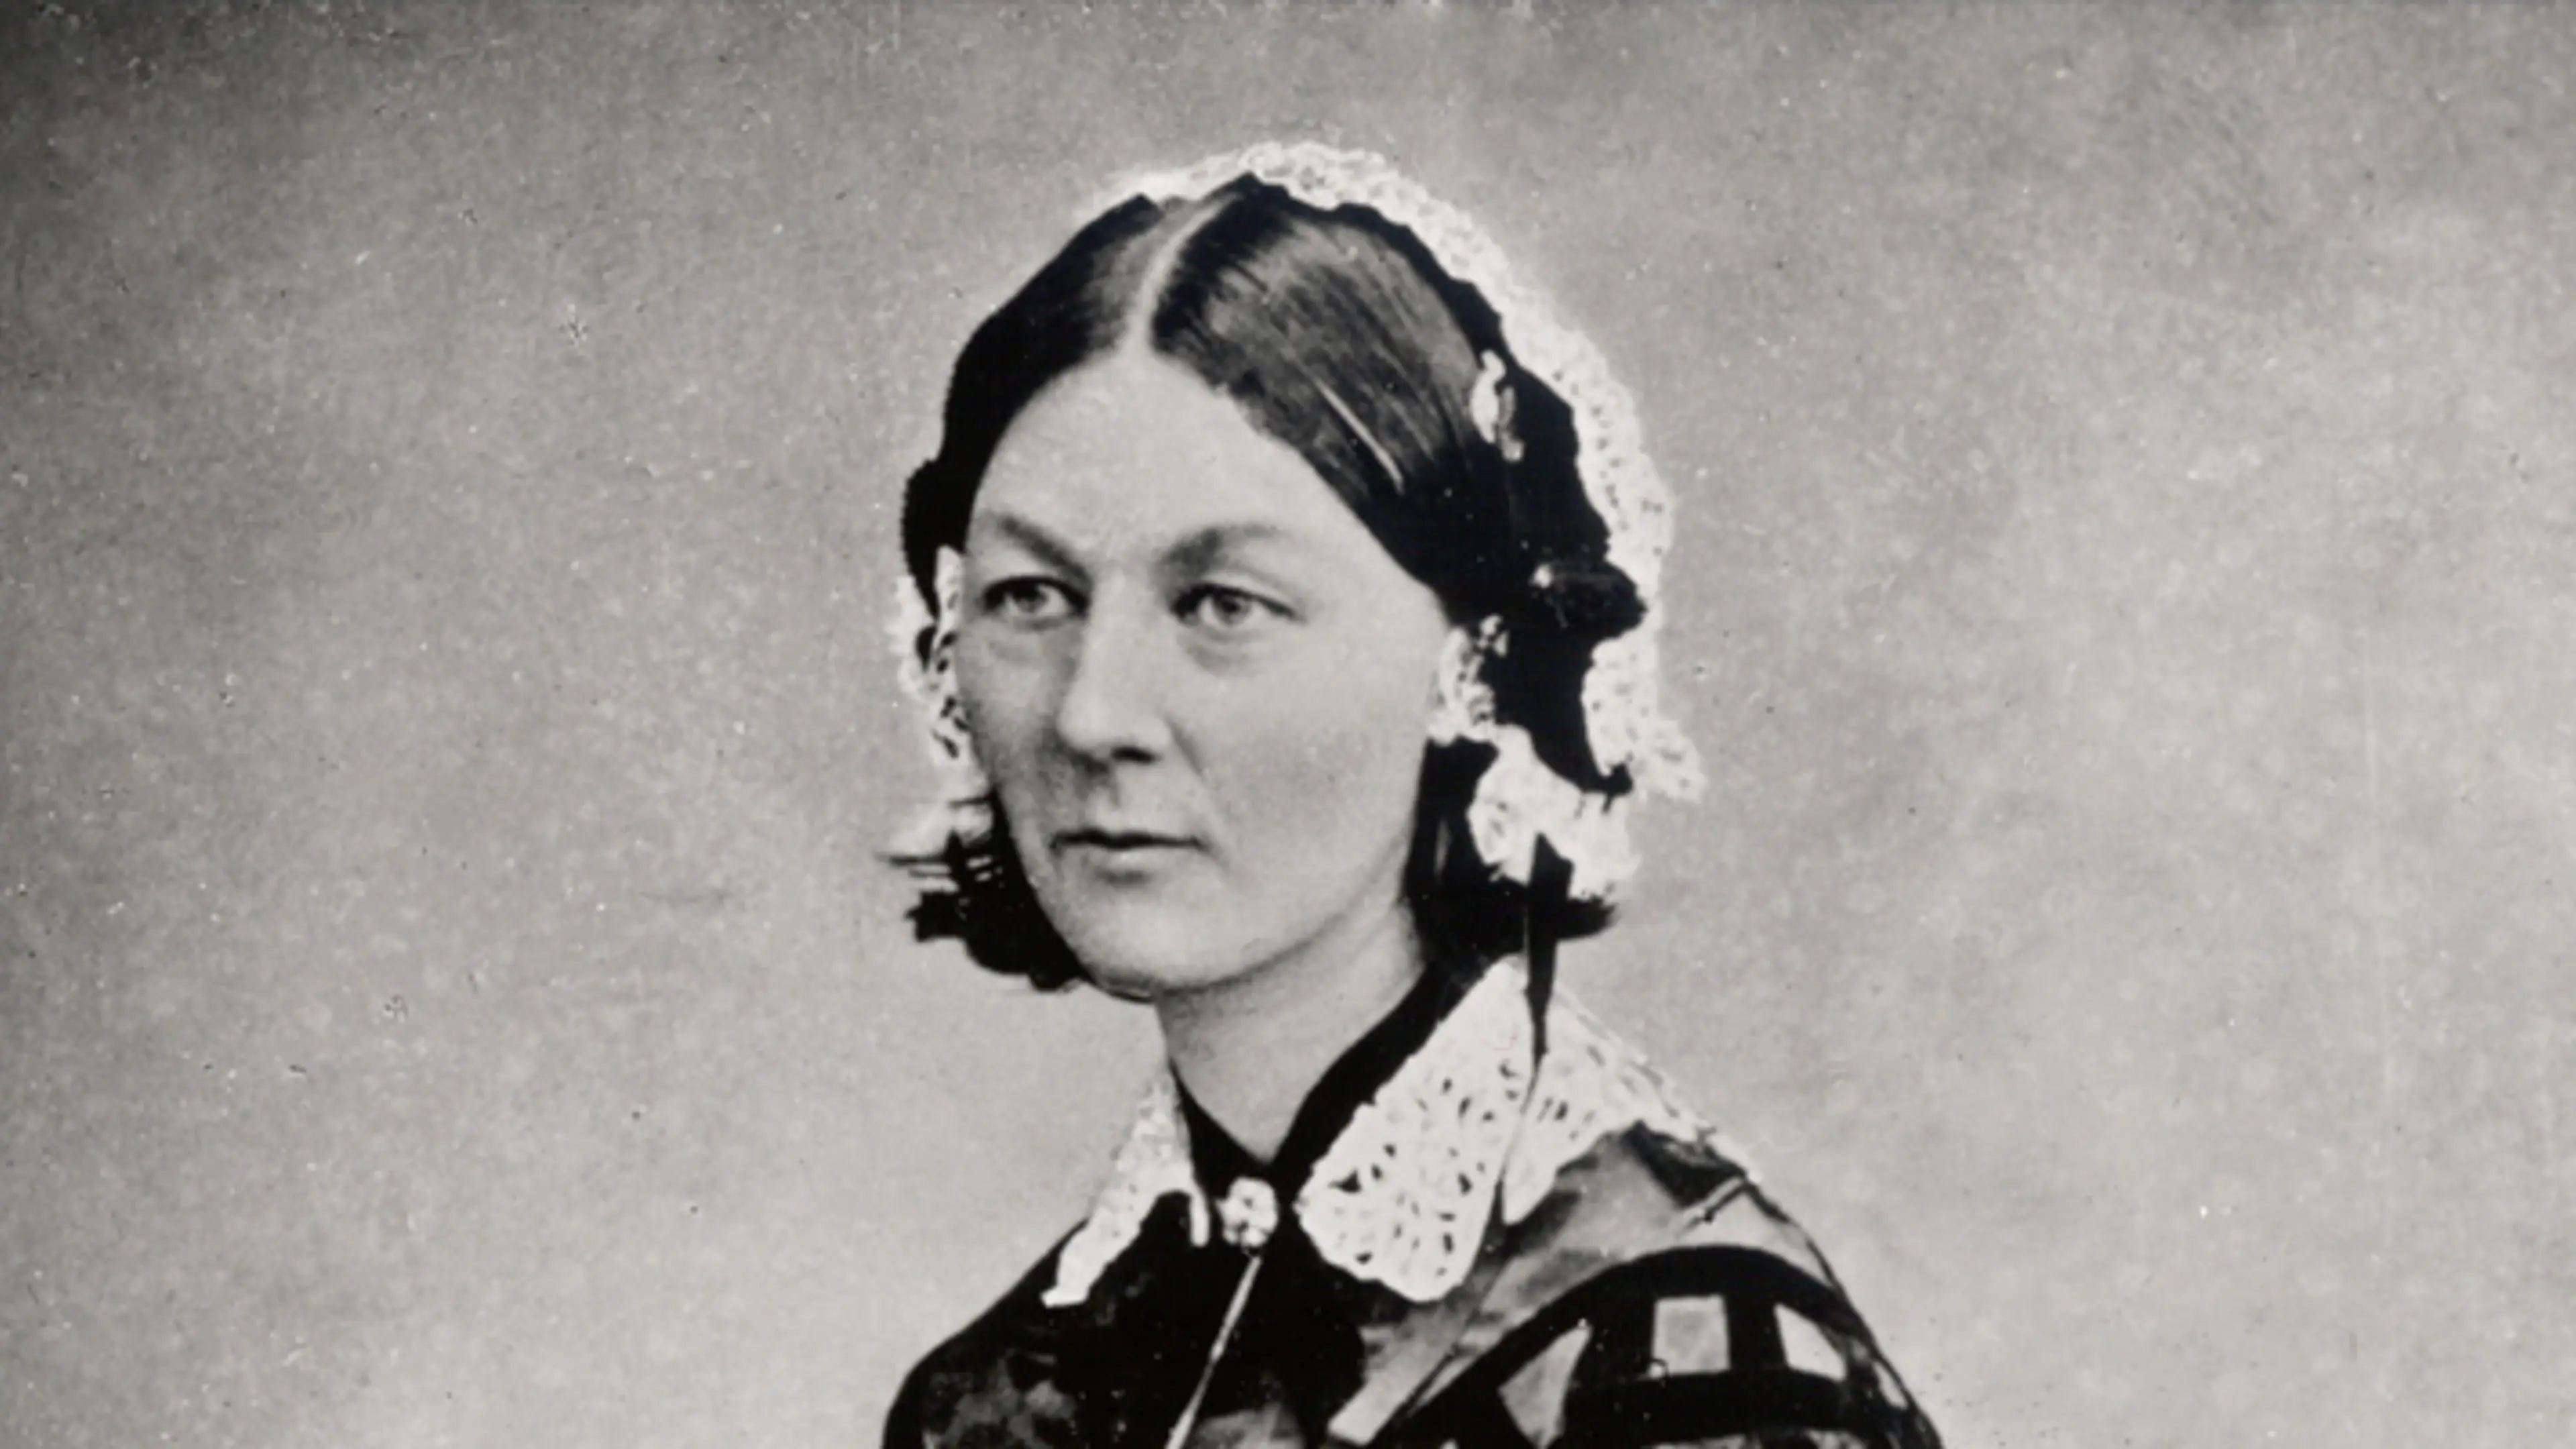 20 quotes on nursing and life from the ‘Lady with the Lamp’, Florence Nightingale